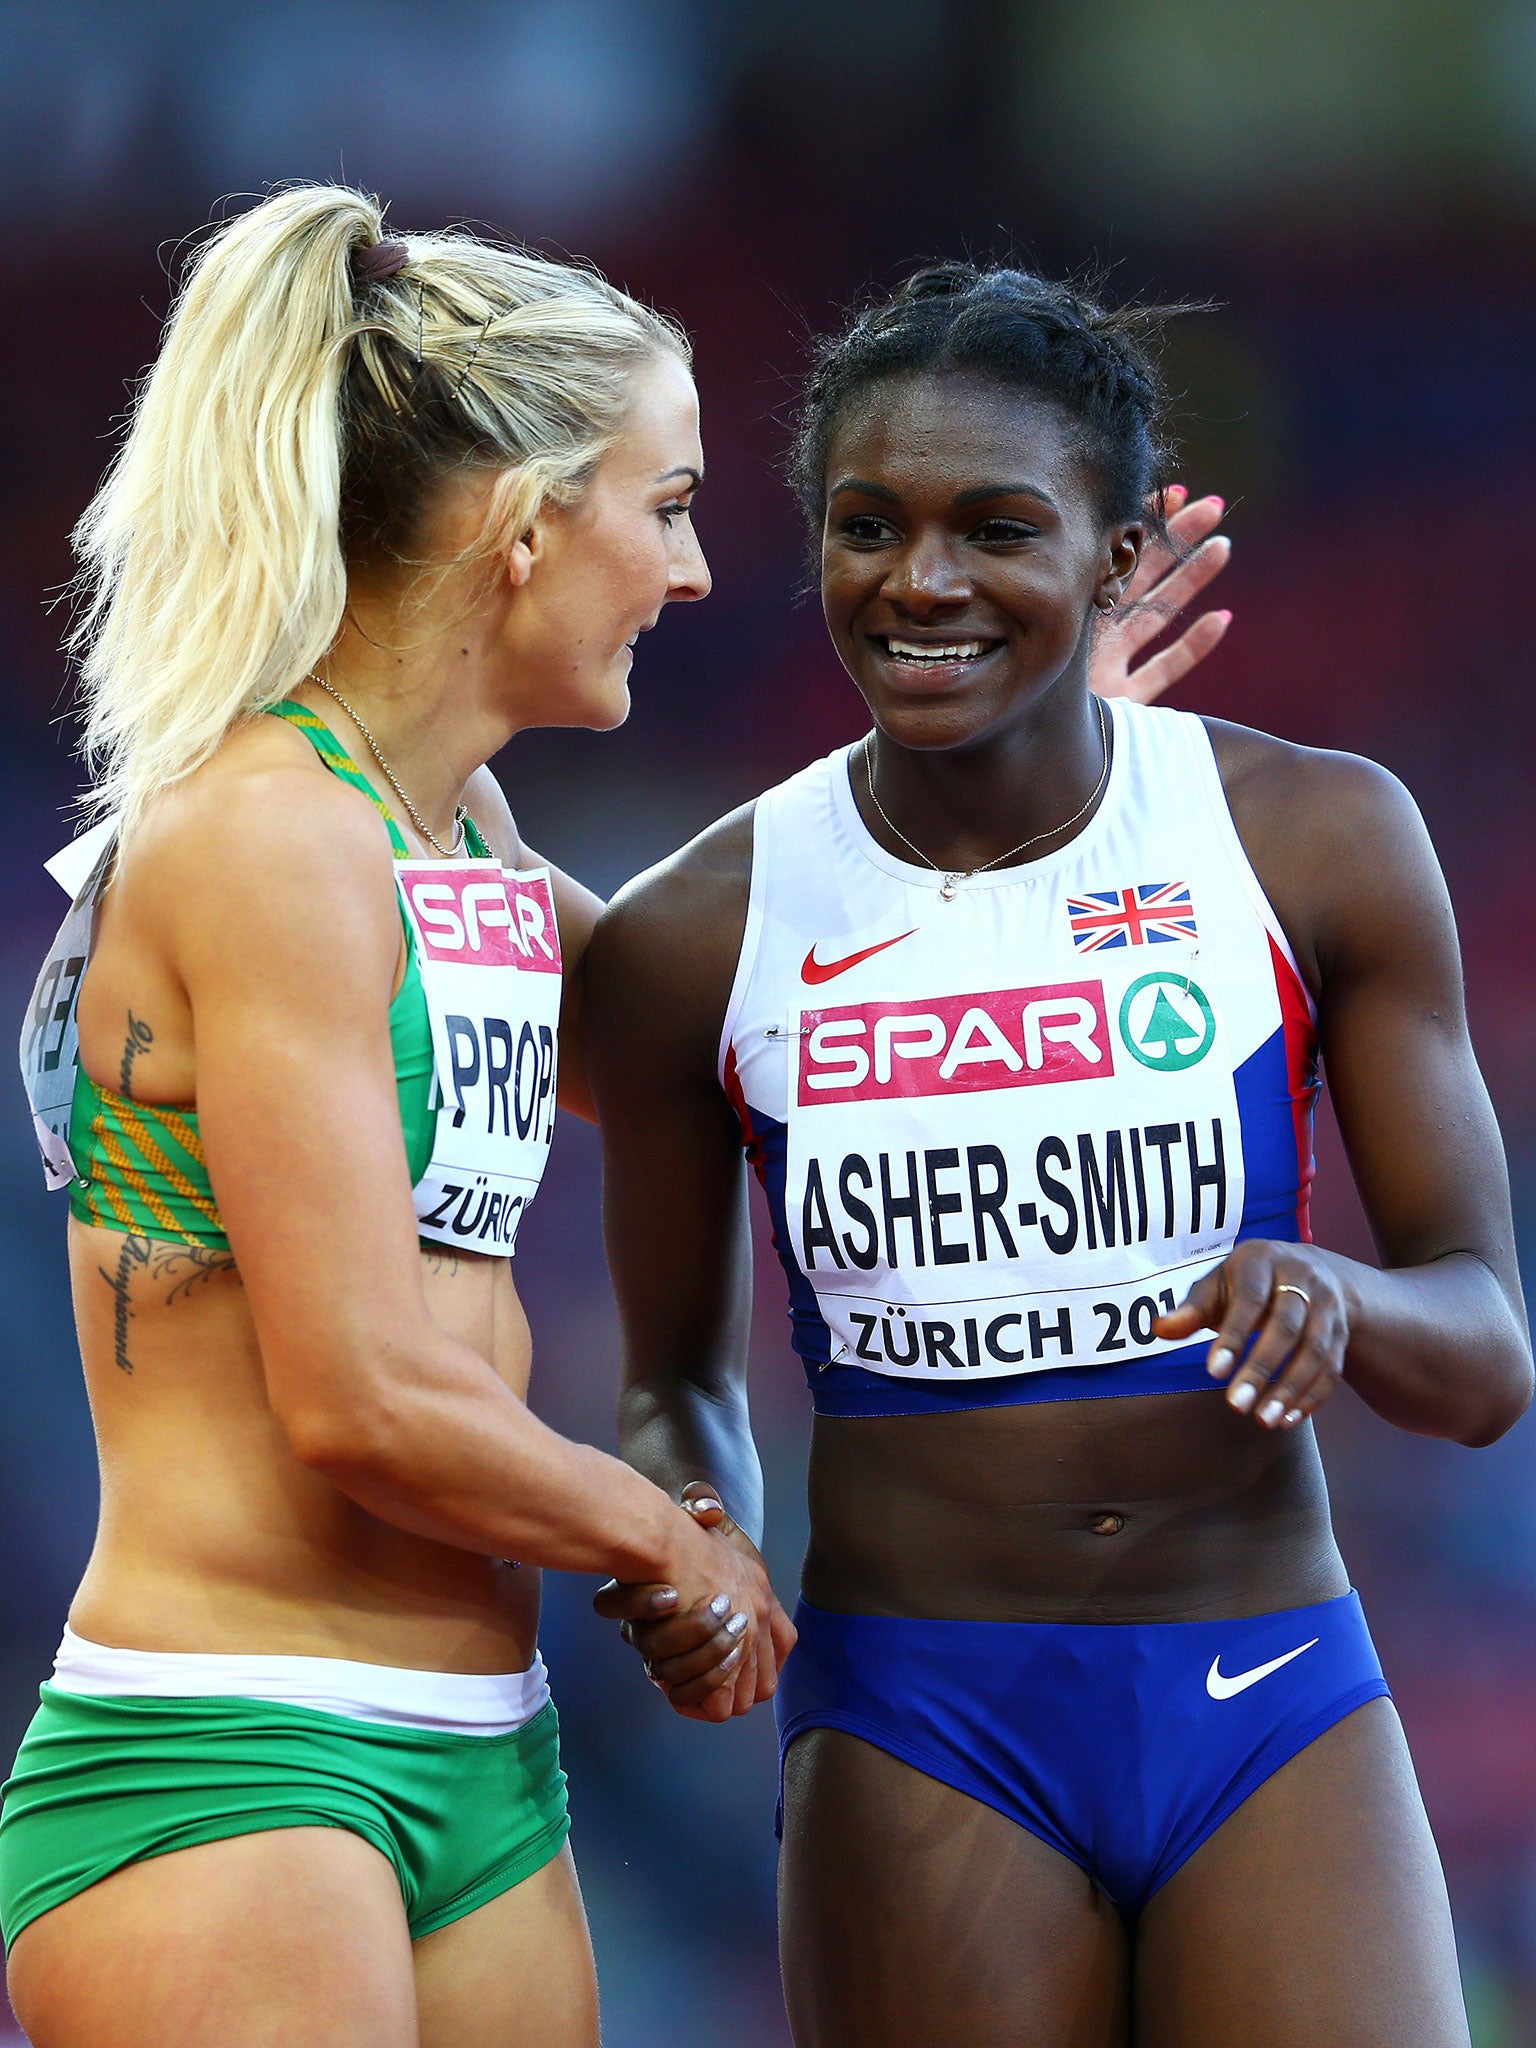 Dina Asher-Smith of Great Britain and Northern Ireland and Kelly Proper of Ireland speak after the Women's 200 metres semi-final on day three of the 22nd European Athletics Championships